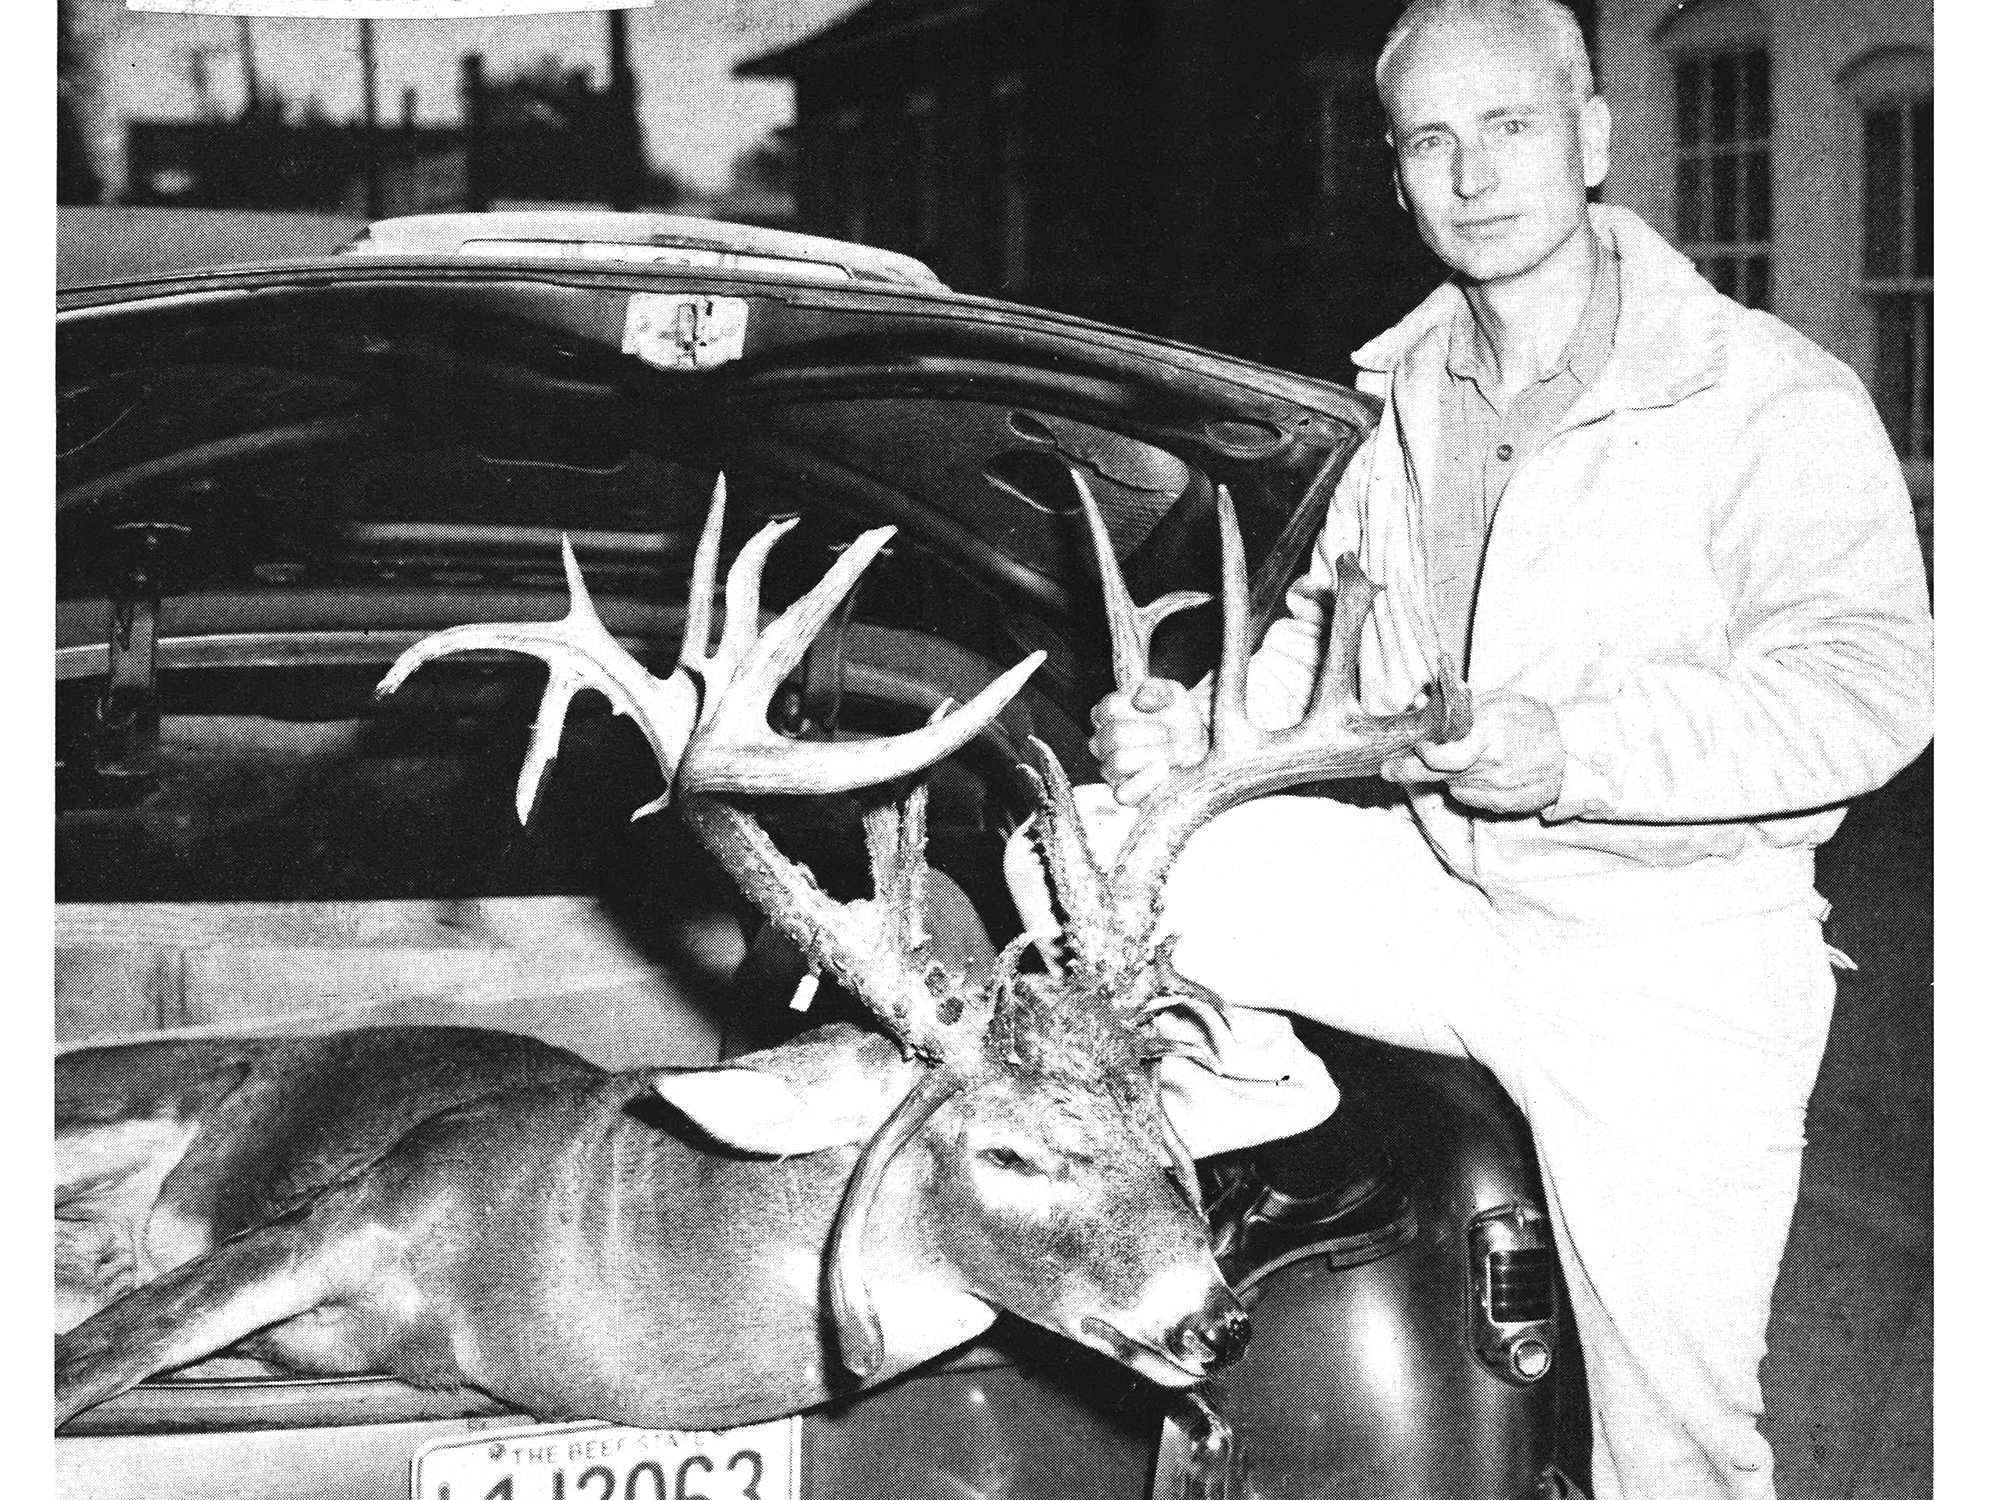 B&W photo of hunter with deer in trunk